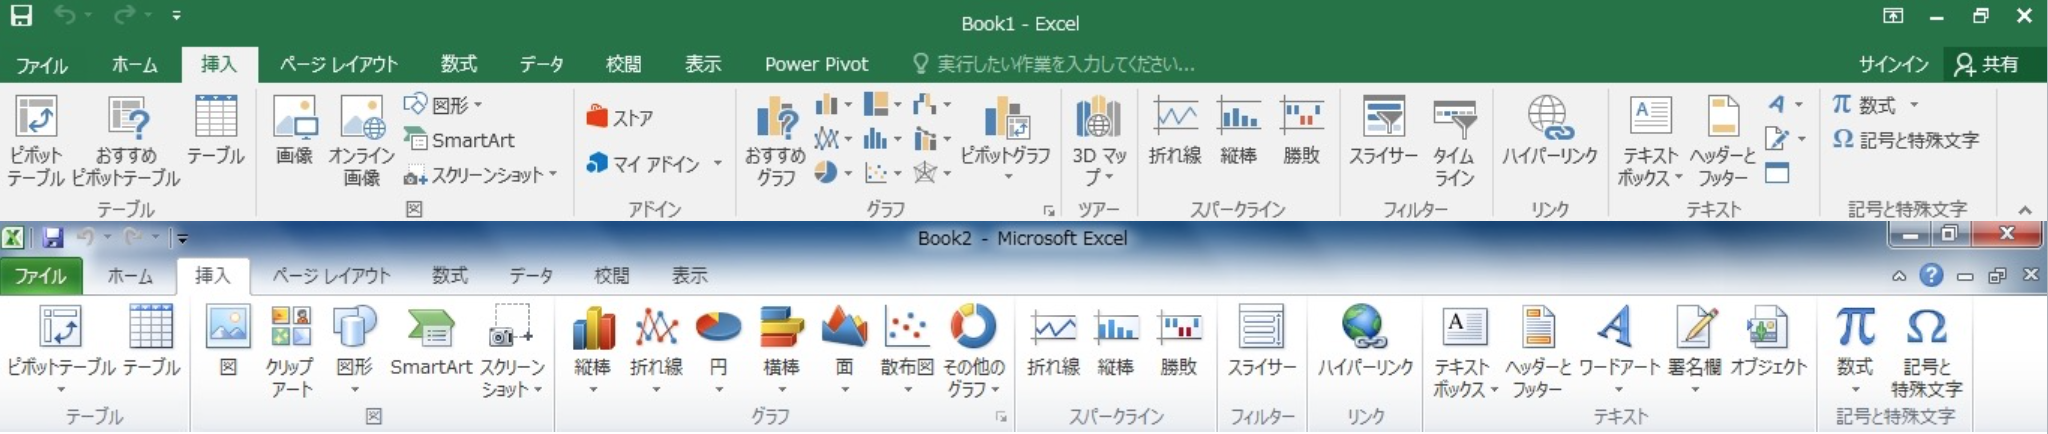 Excel2016とExcel2010の挿入タブ